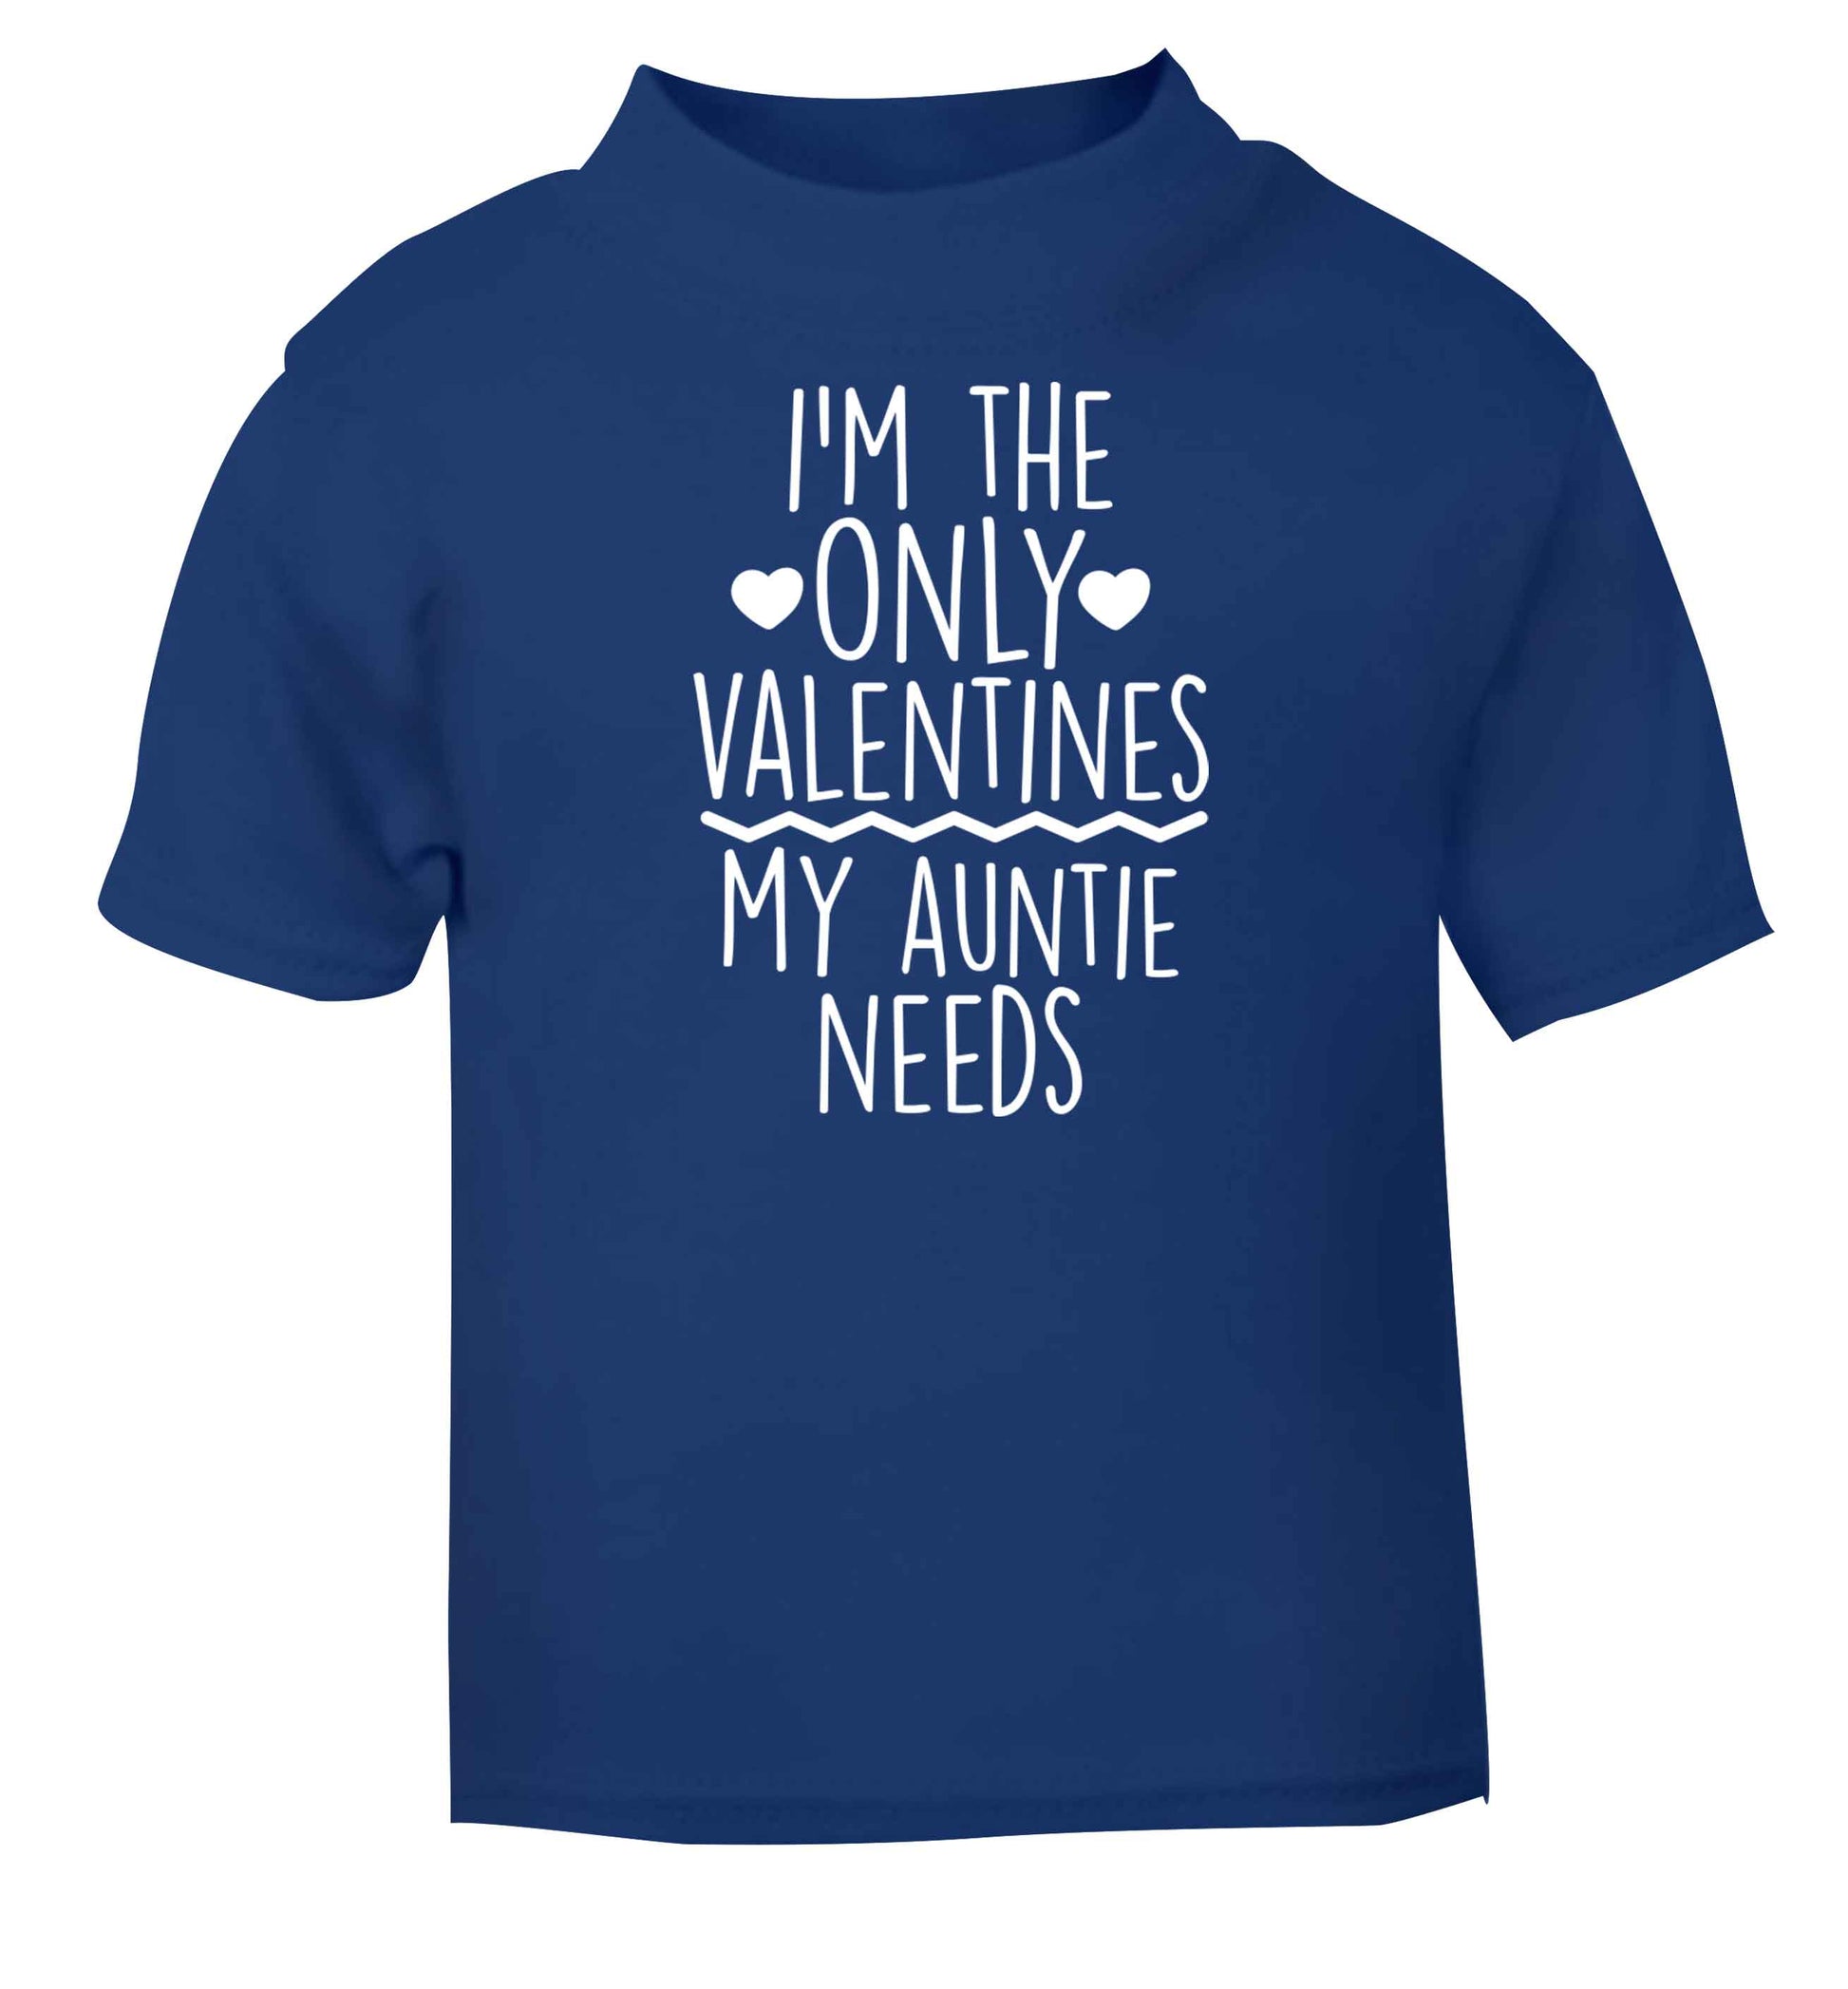 I'm the only valentines my auntie needs blue baby toddler Tshirt 2 Years